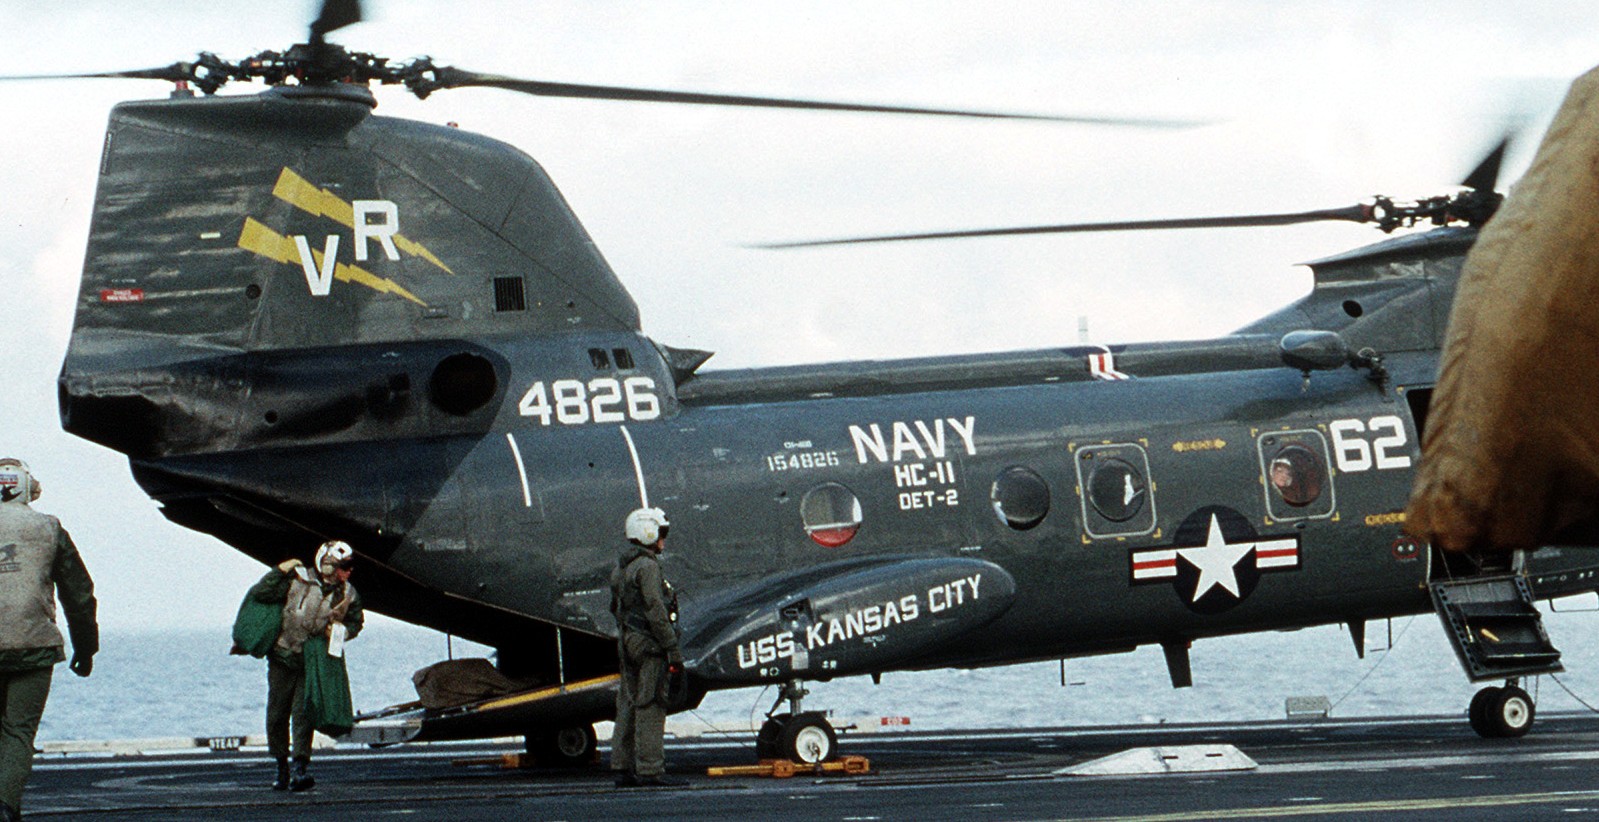 hc-11 gunbearers helicopter combat support squadron navy ch-46 sea knight 139